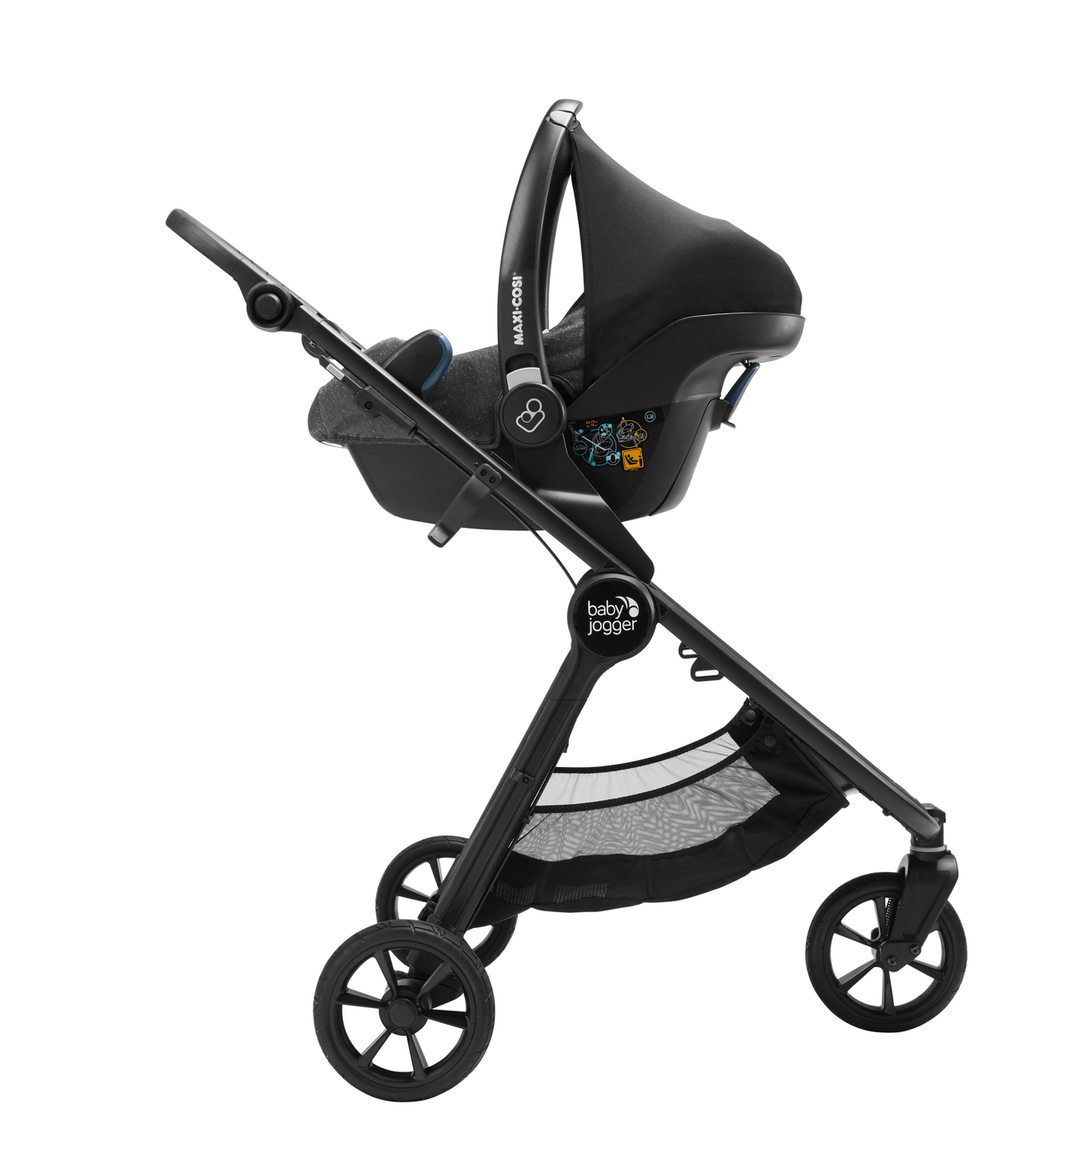 Why Choose Baby Jogger: Safety & Warranty